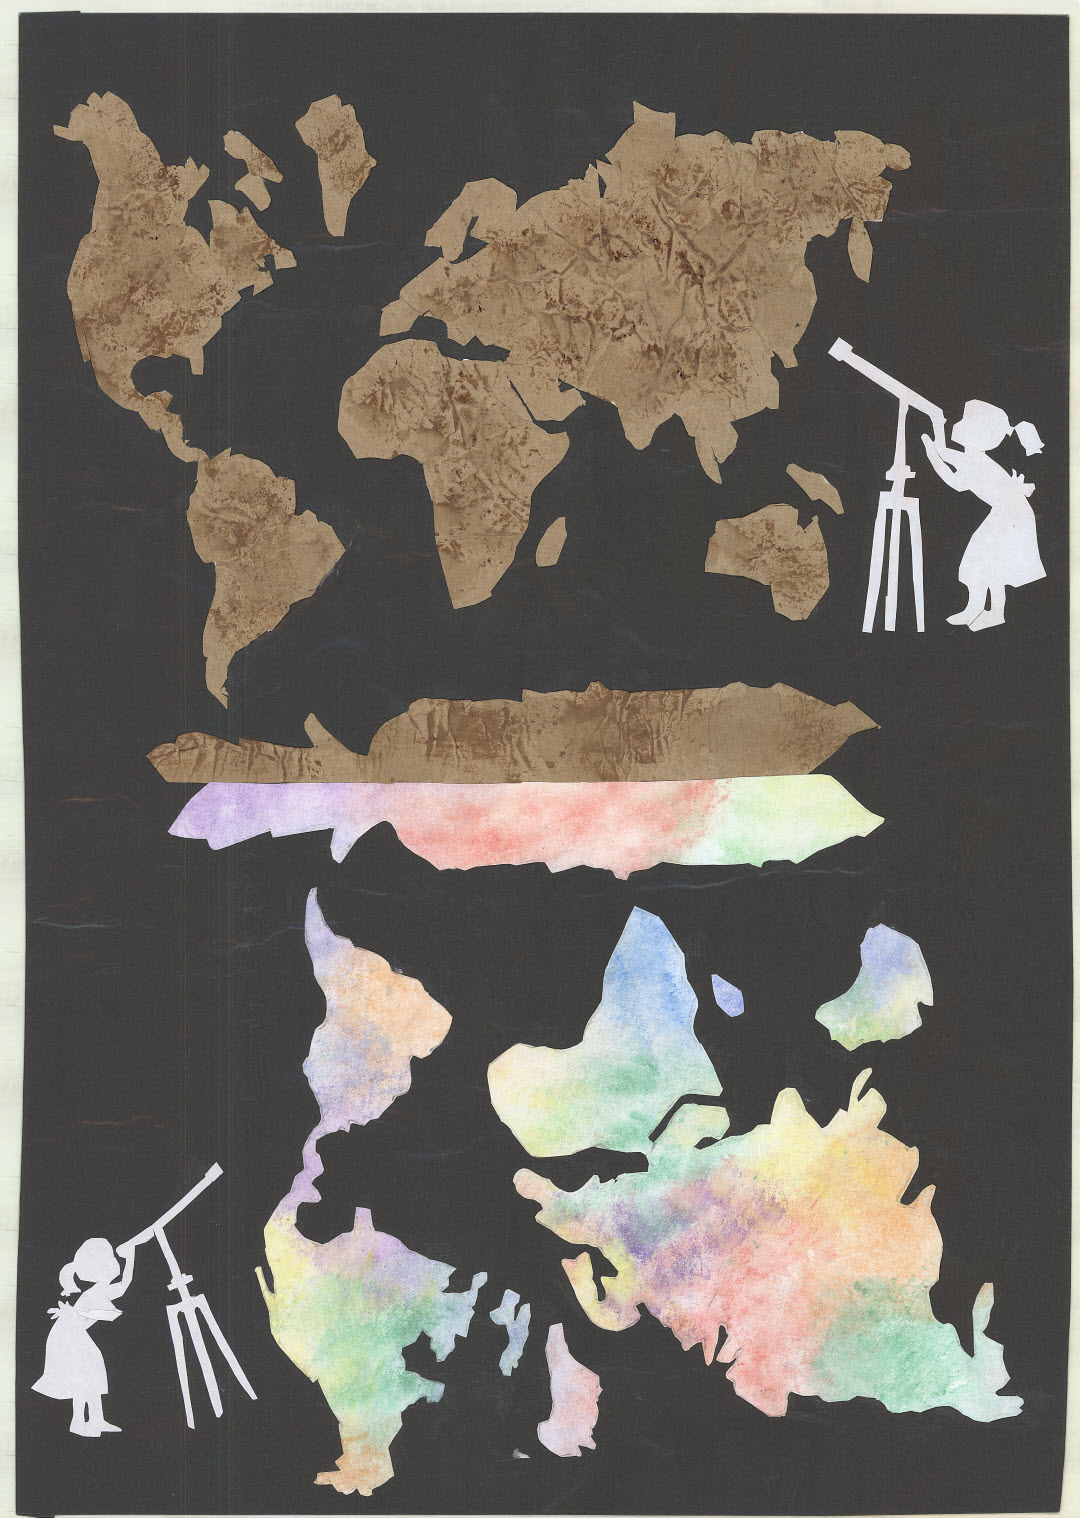 Map showing all of the continents and a girl with a telescope